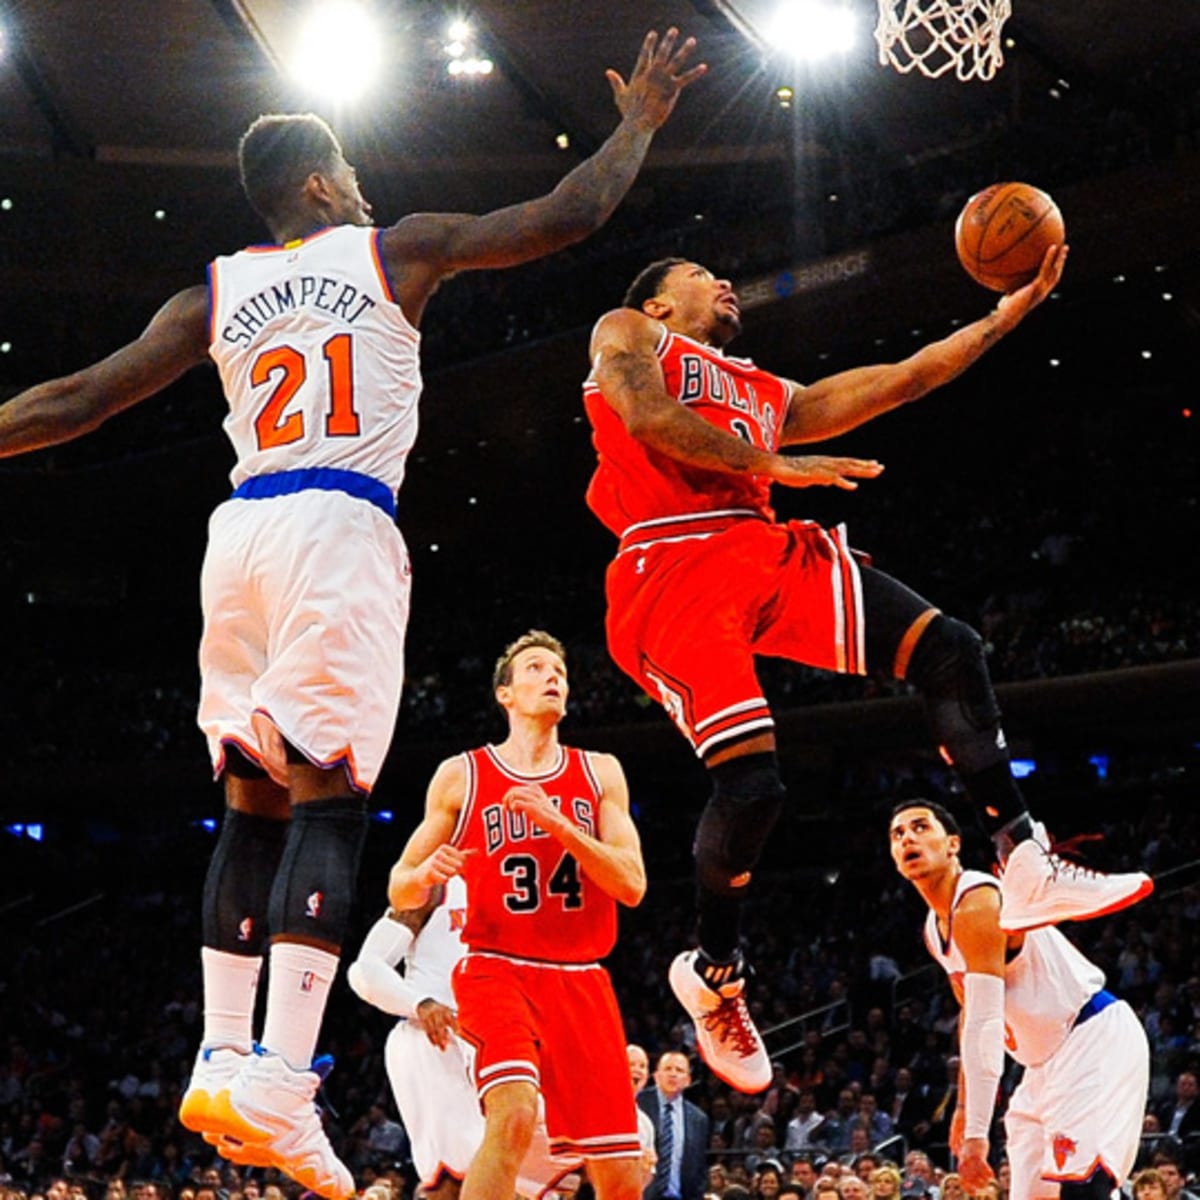 Derrick Rose 'OK' after going missing before Knicks loss to